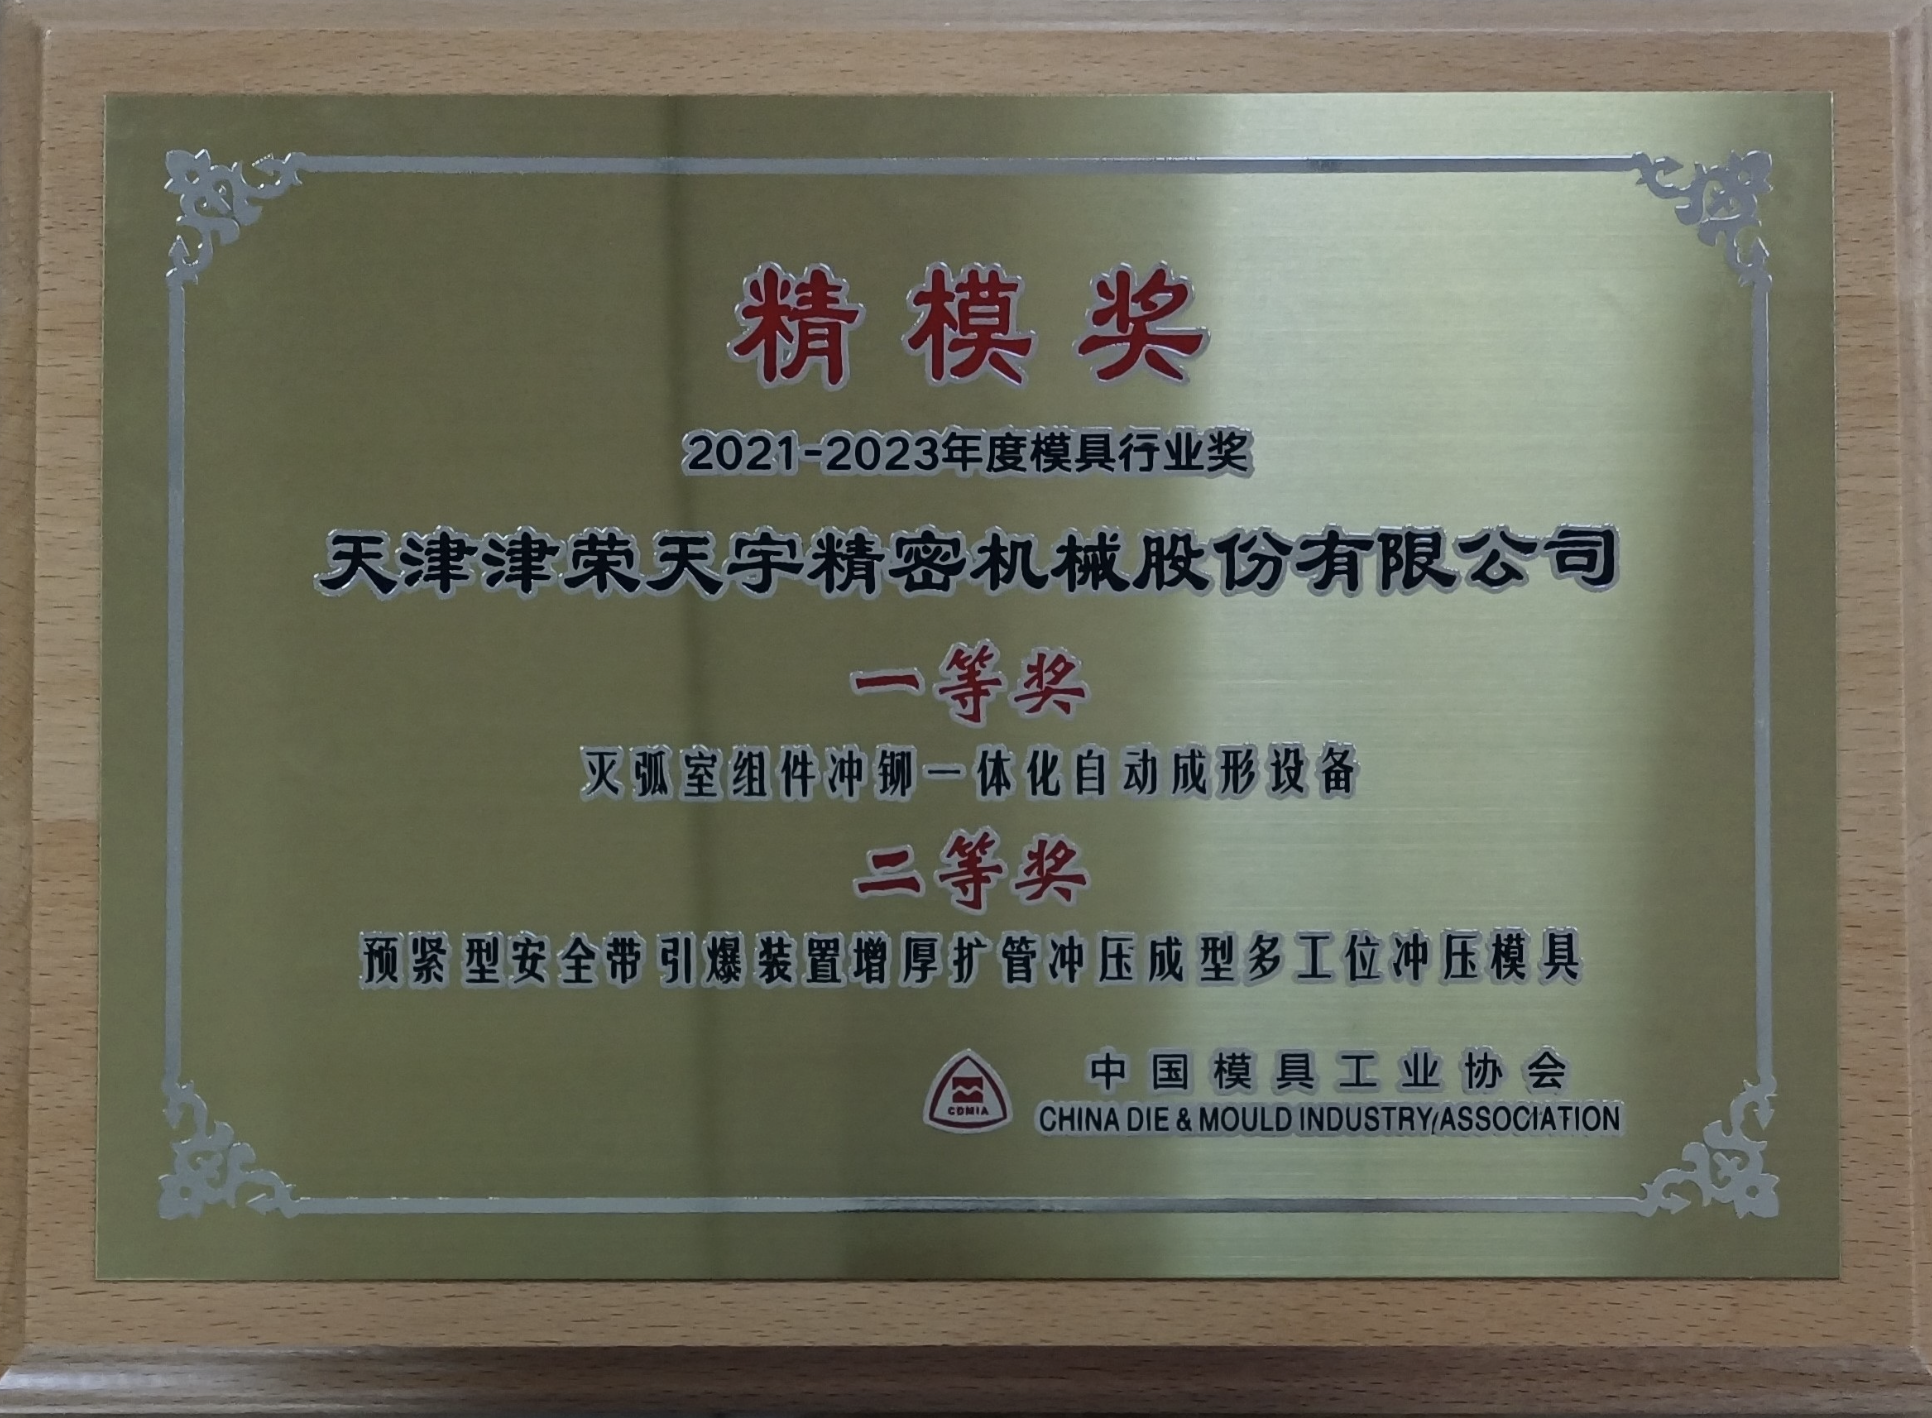 2021-2023 Mold Industry Award Precision Mold Award First and Second Prizes‘